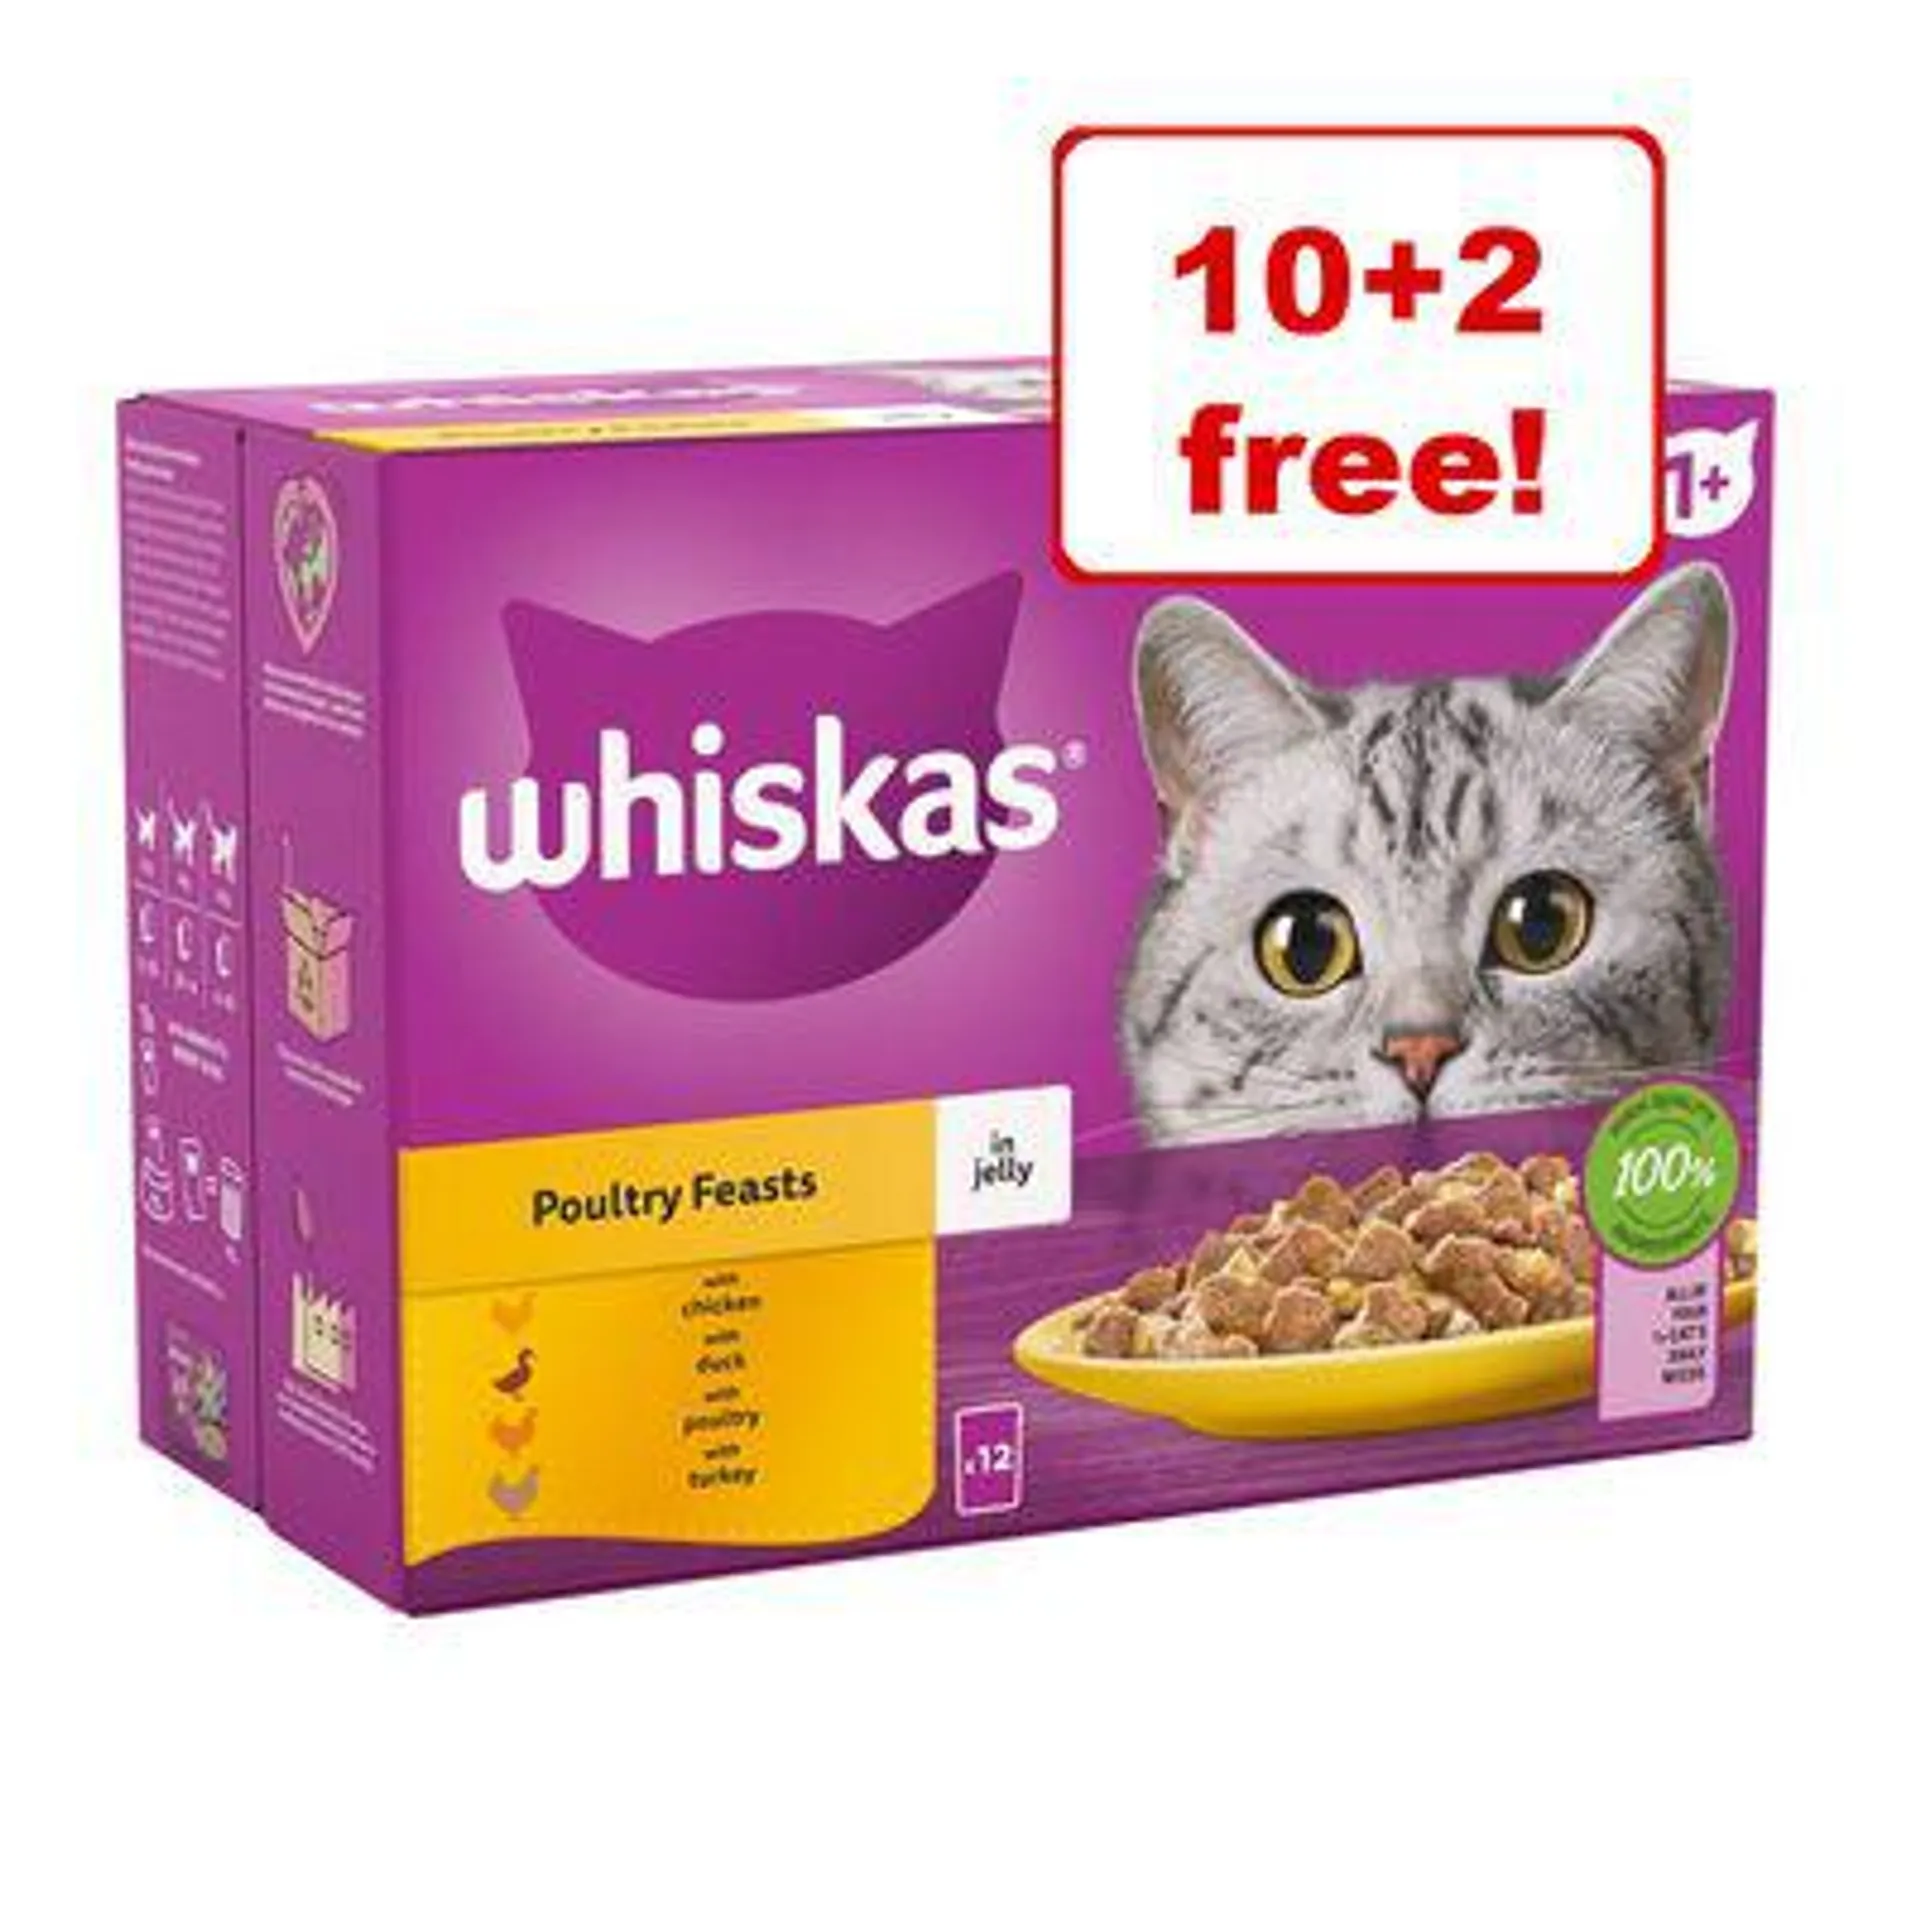 12 x 85g Whiskas 1+ Poultry Feasts in Jelly Wet Cat Food - 10 + 2 Free! *